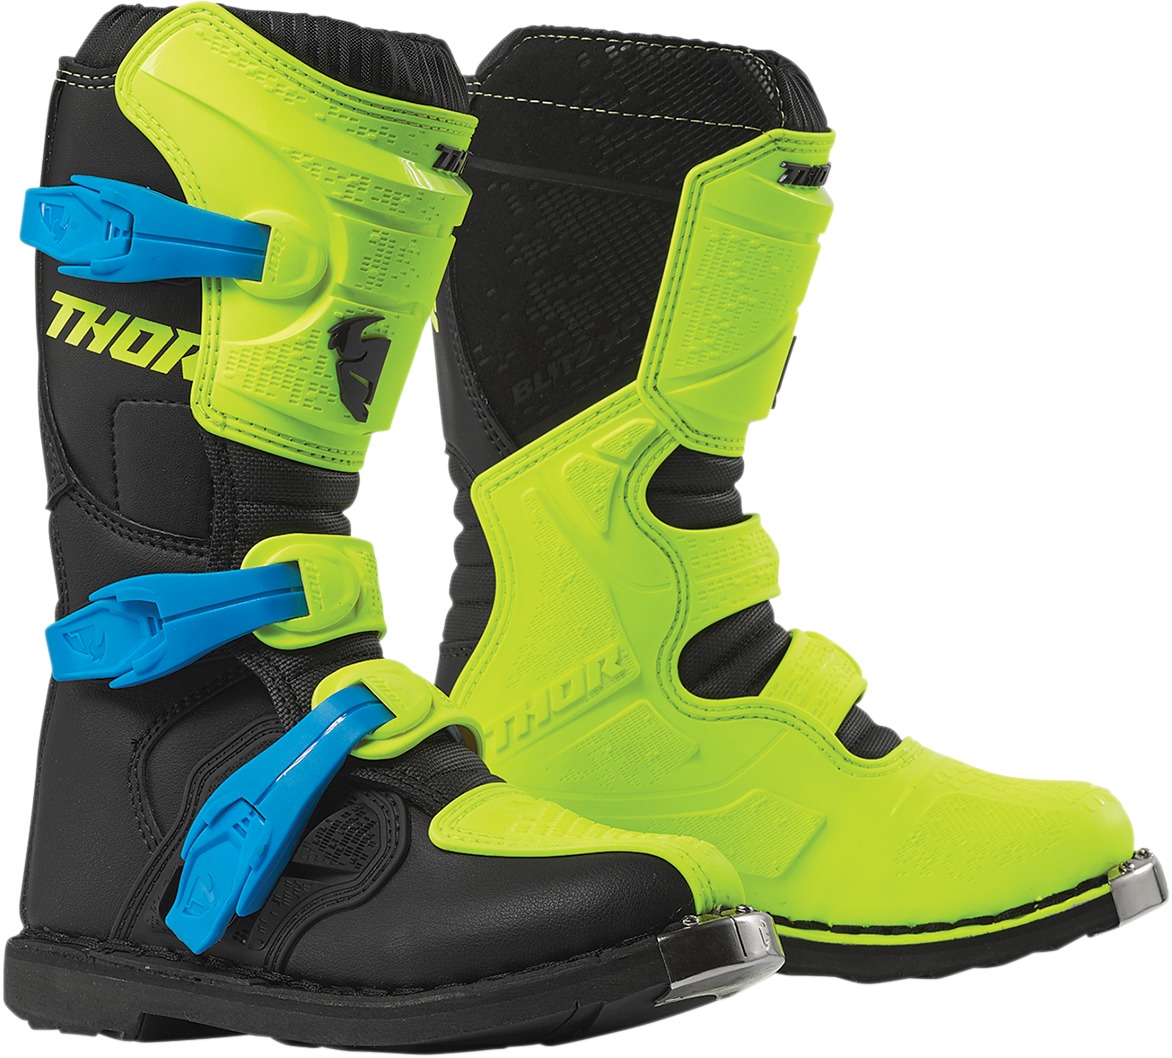 Blitz XP Dirt Bike Boots - Black & Flo Green MX Sole US Size Youth 06 - Click Image to Close